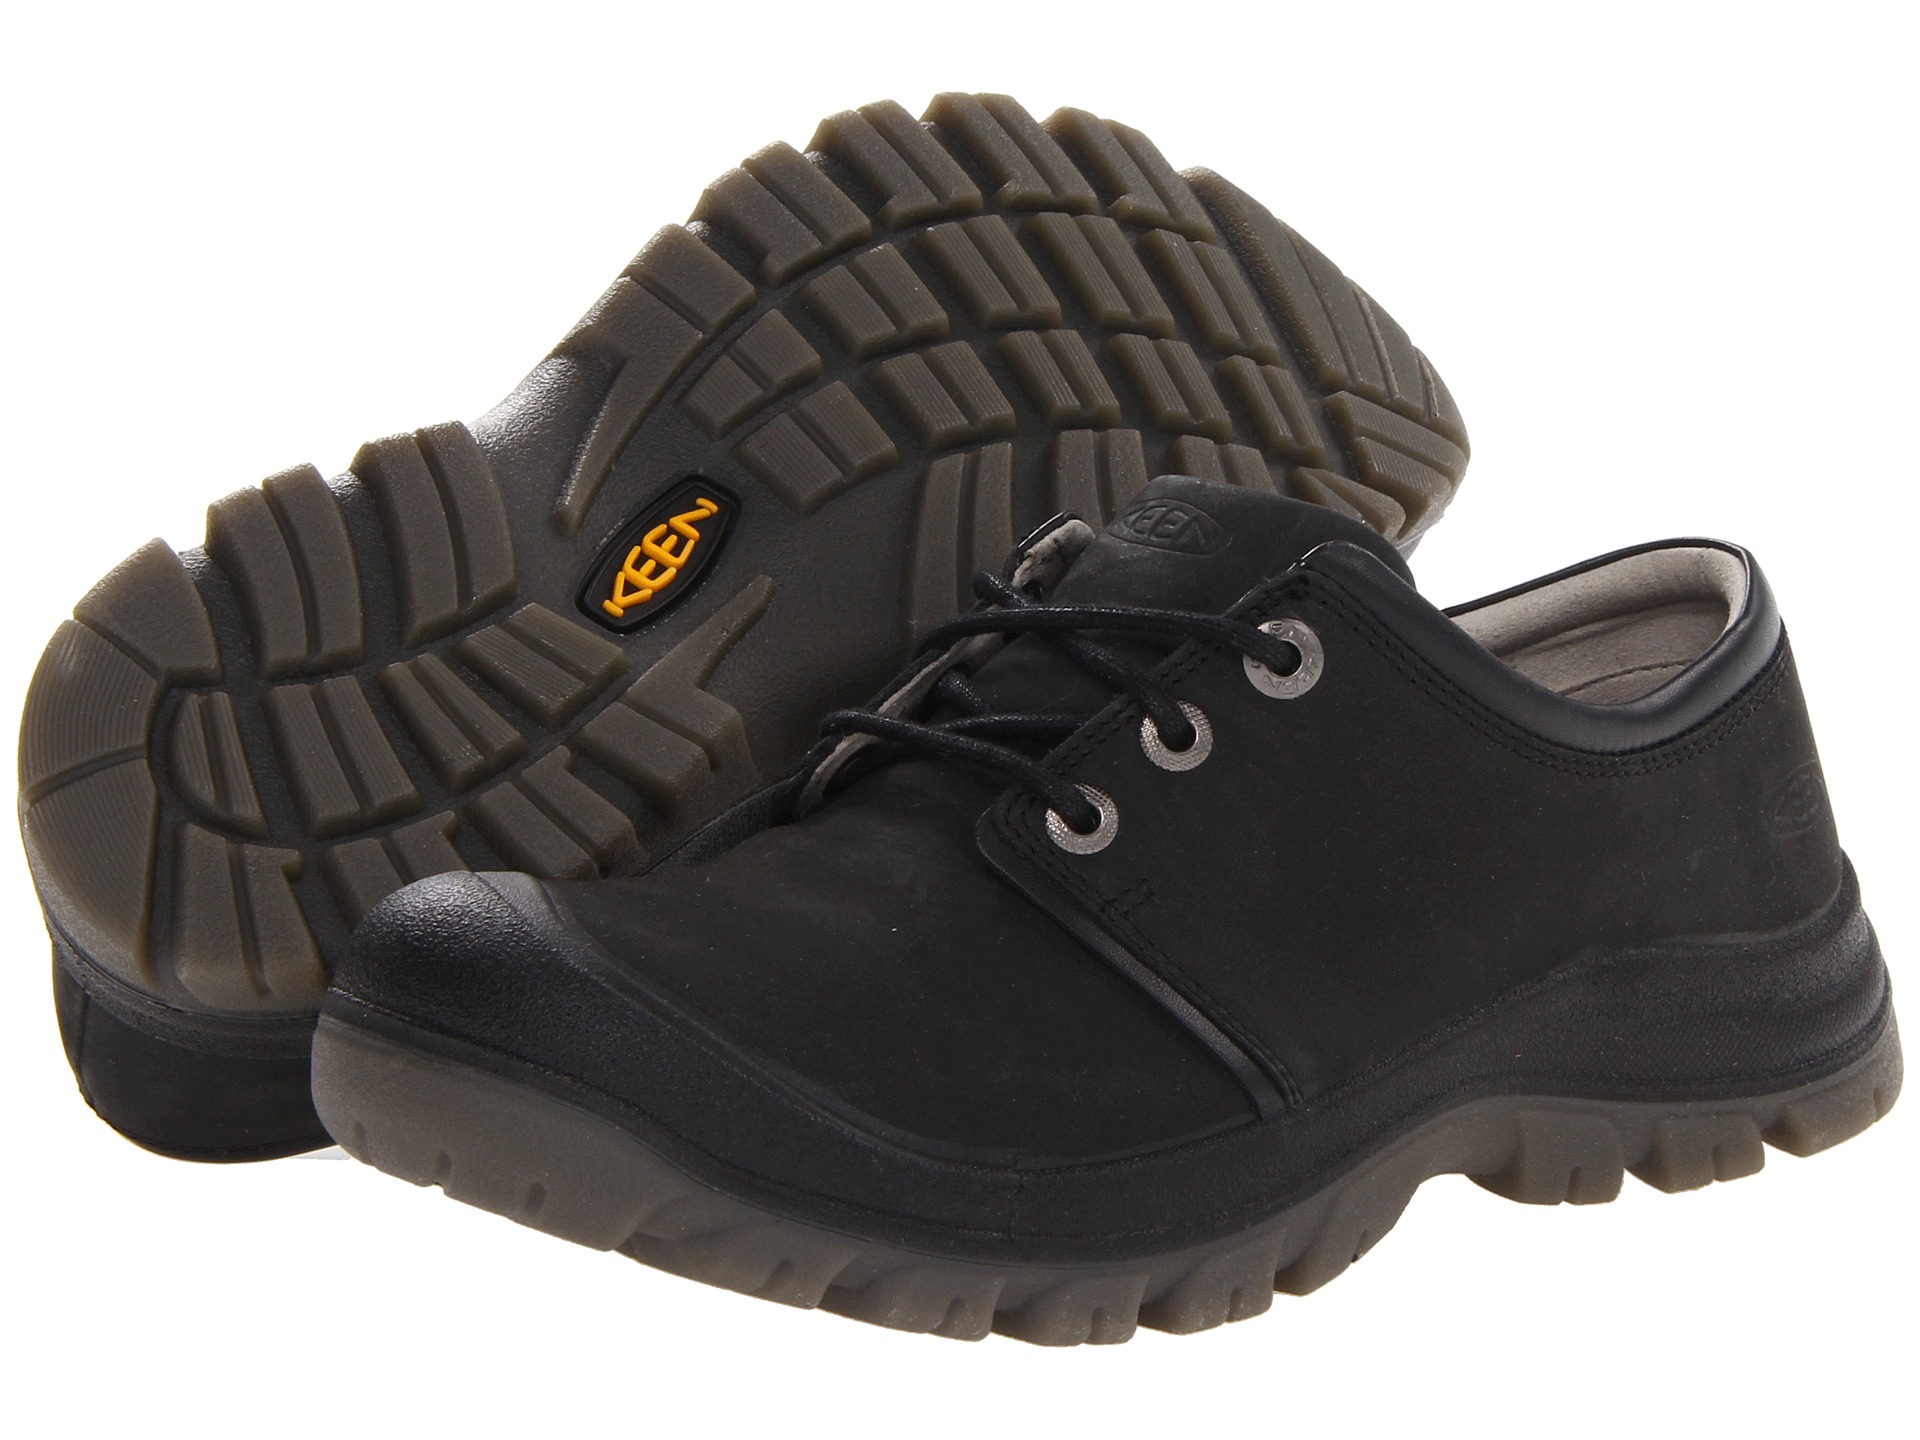 Keen Barkley Lace Black, Shoes | Shipped Free at Zappos